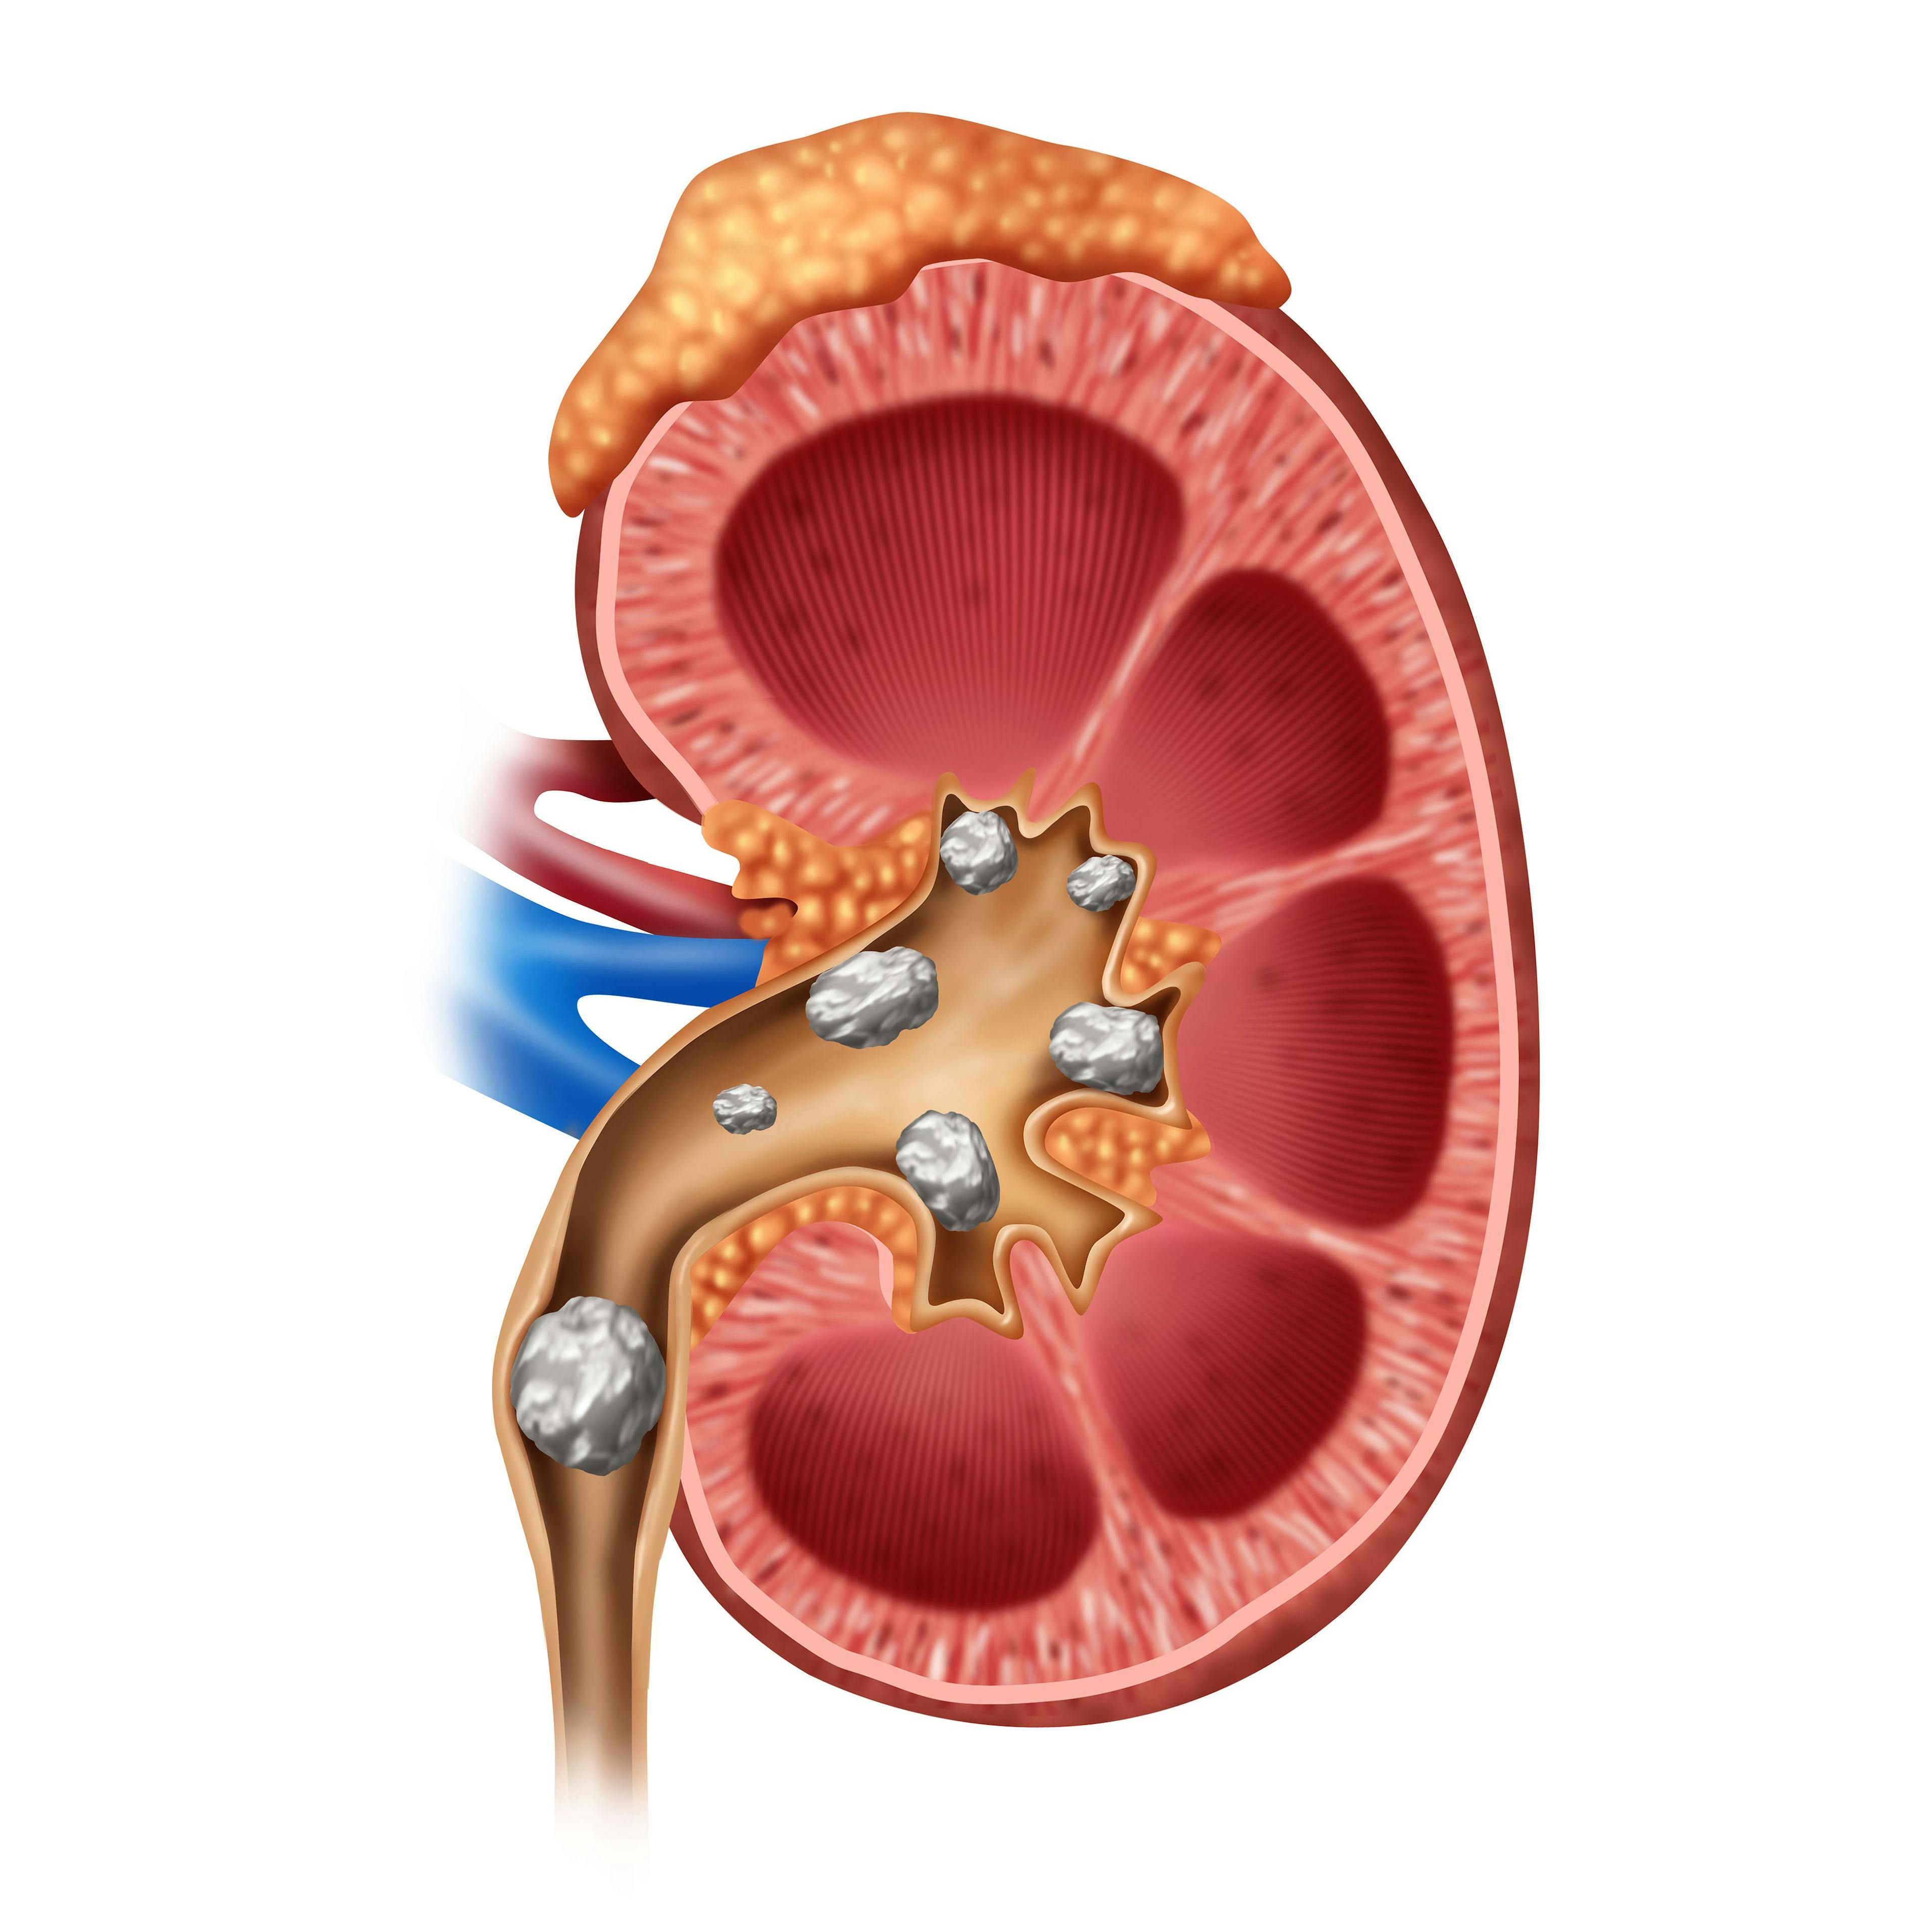 Study Illustrates Kidney Impact After COVID-19 Resolves